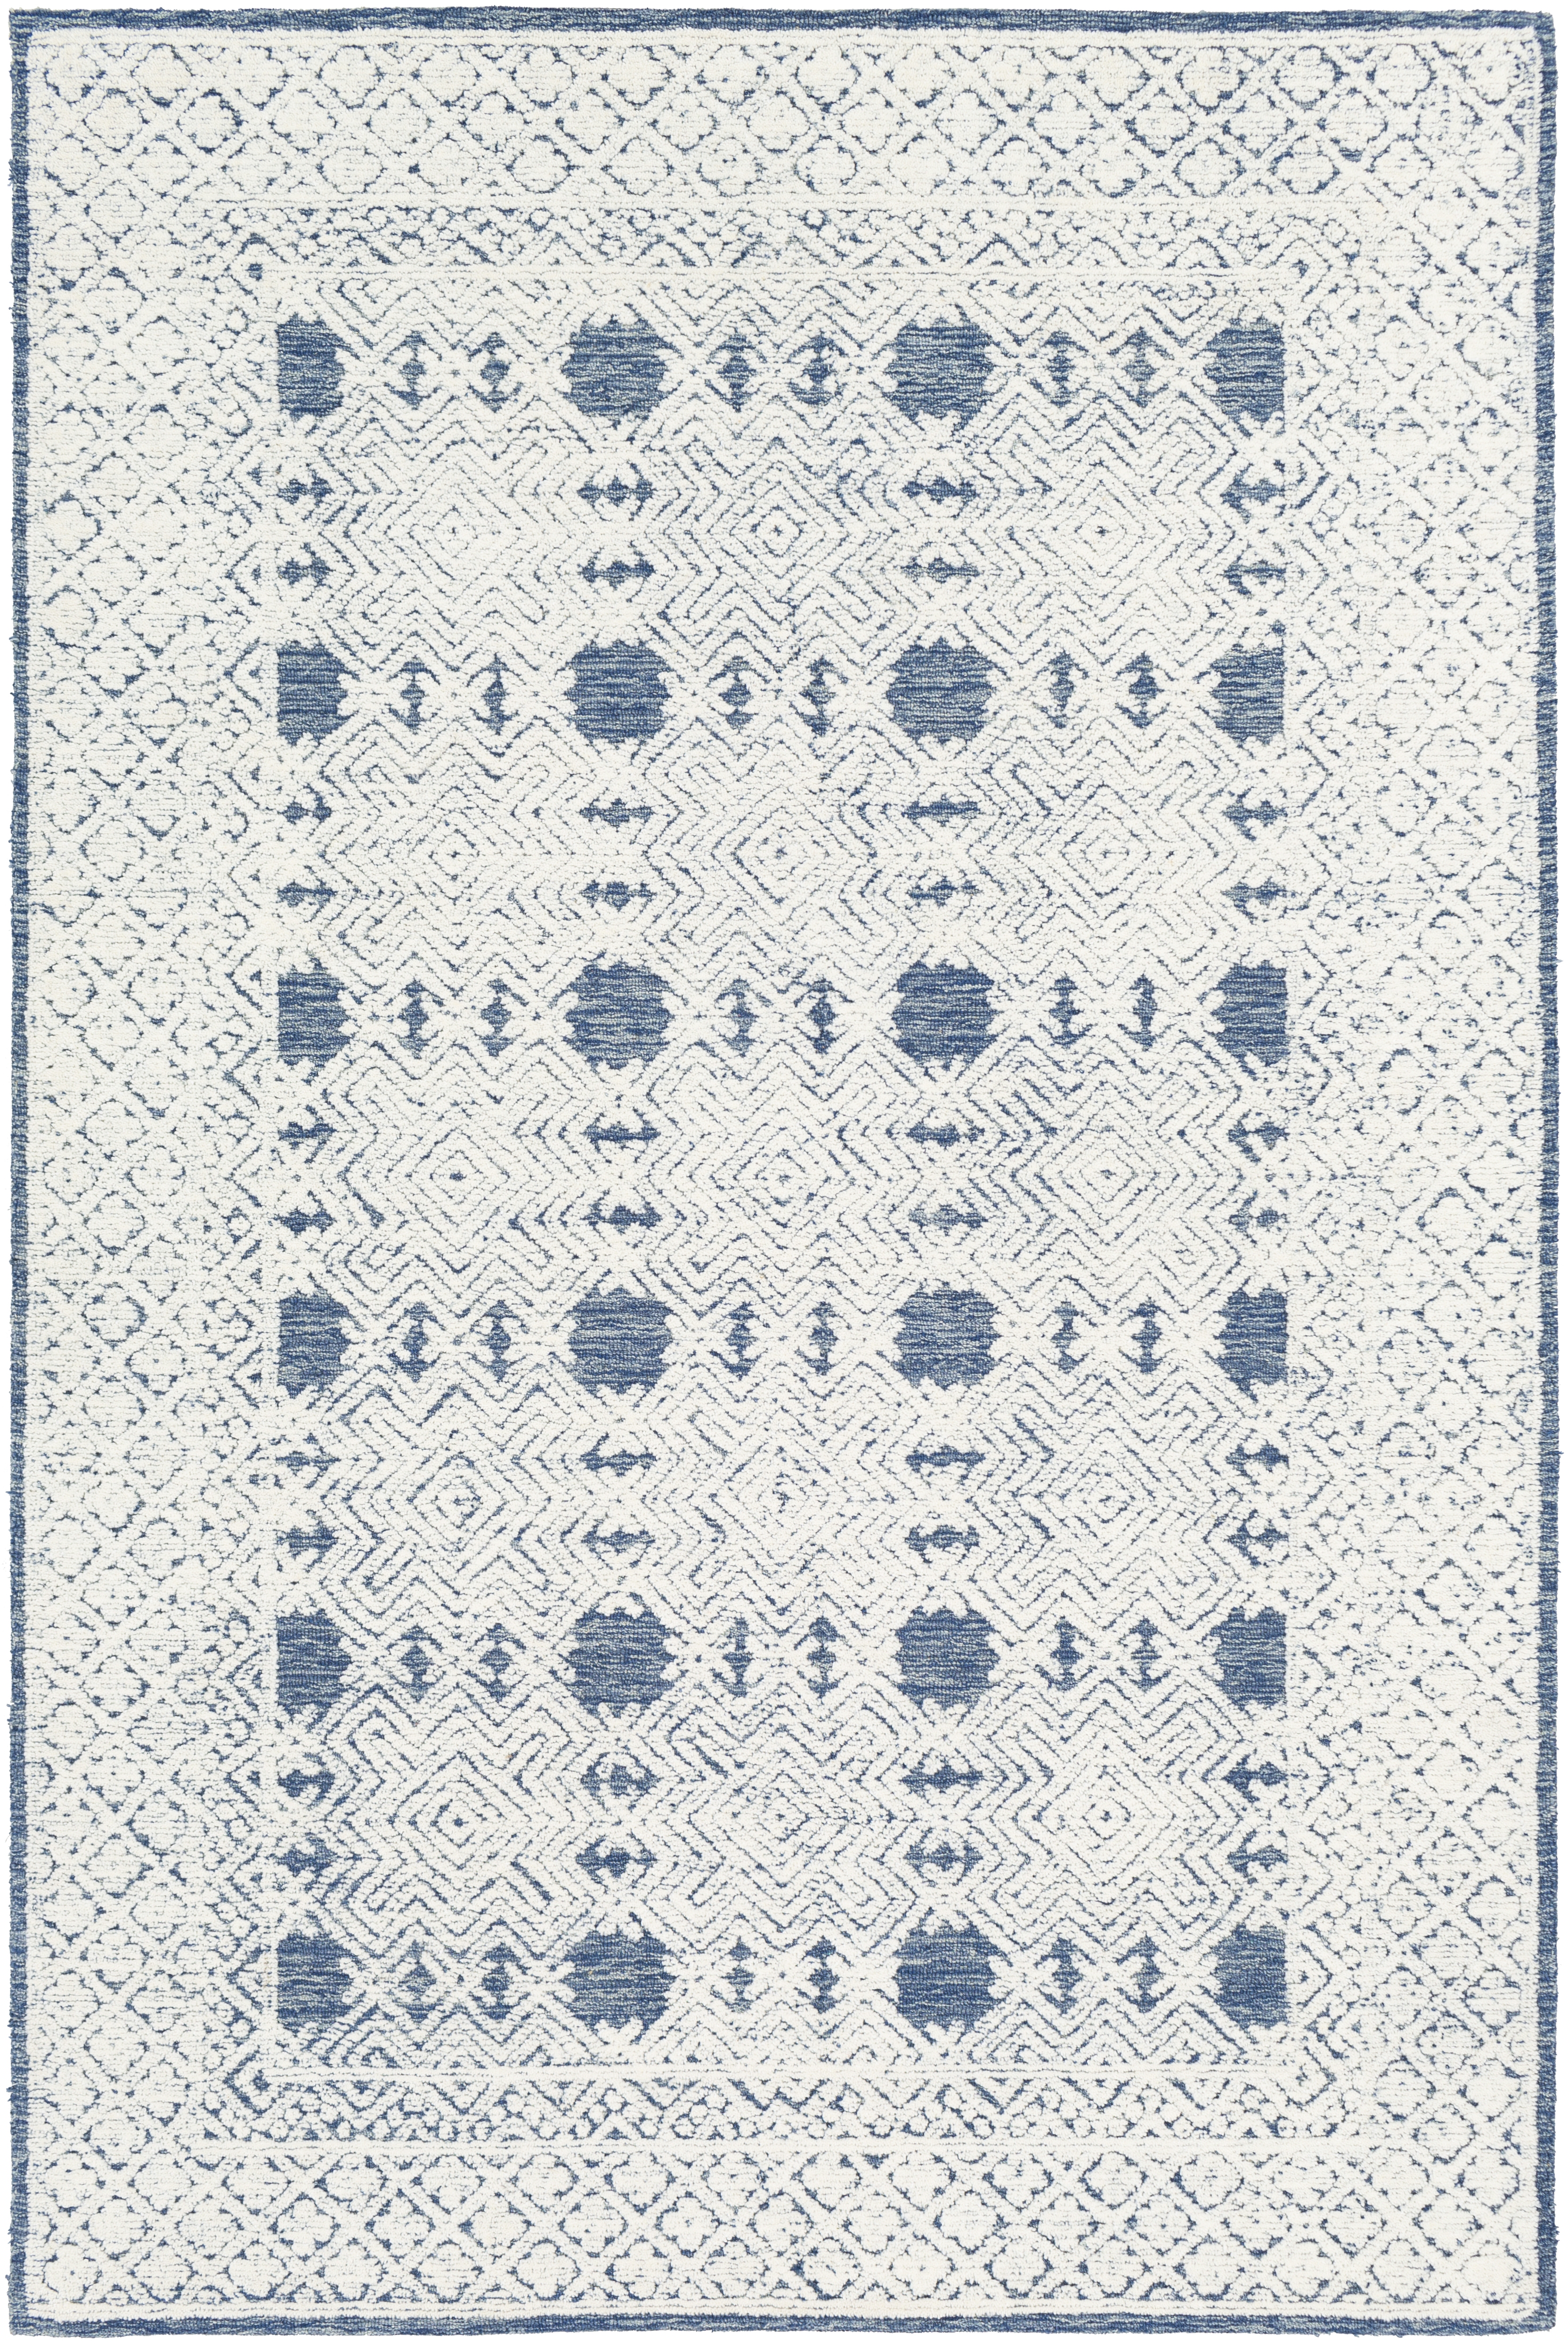 Louvre Rug, 6' x 9' - Image 0